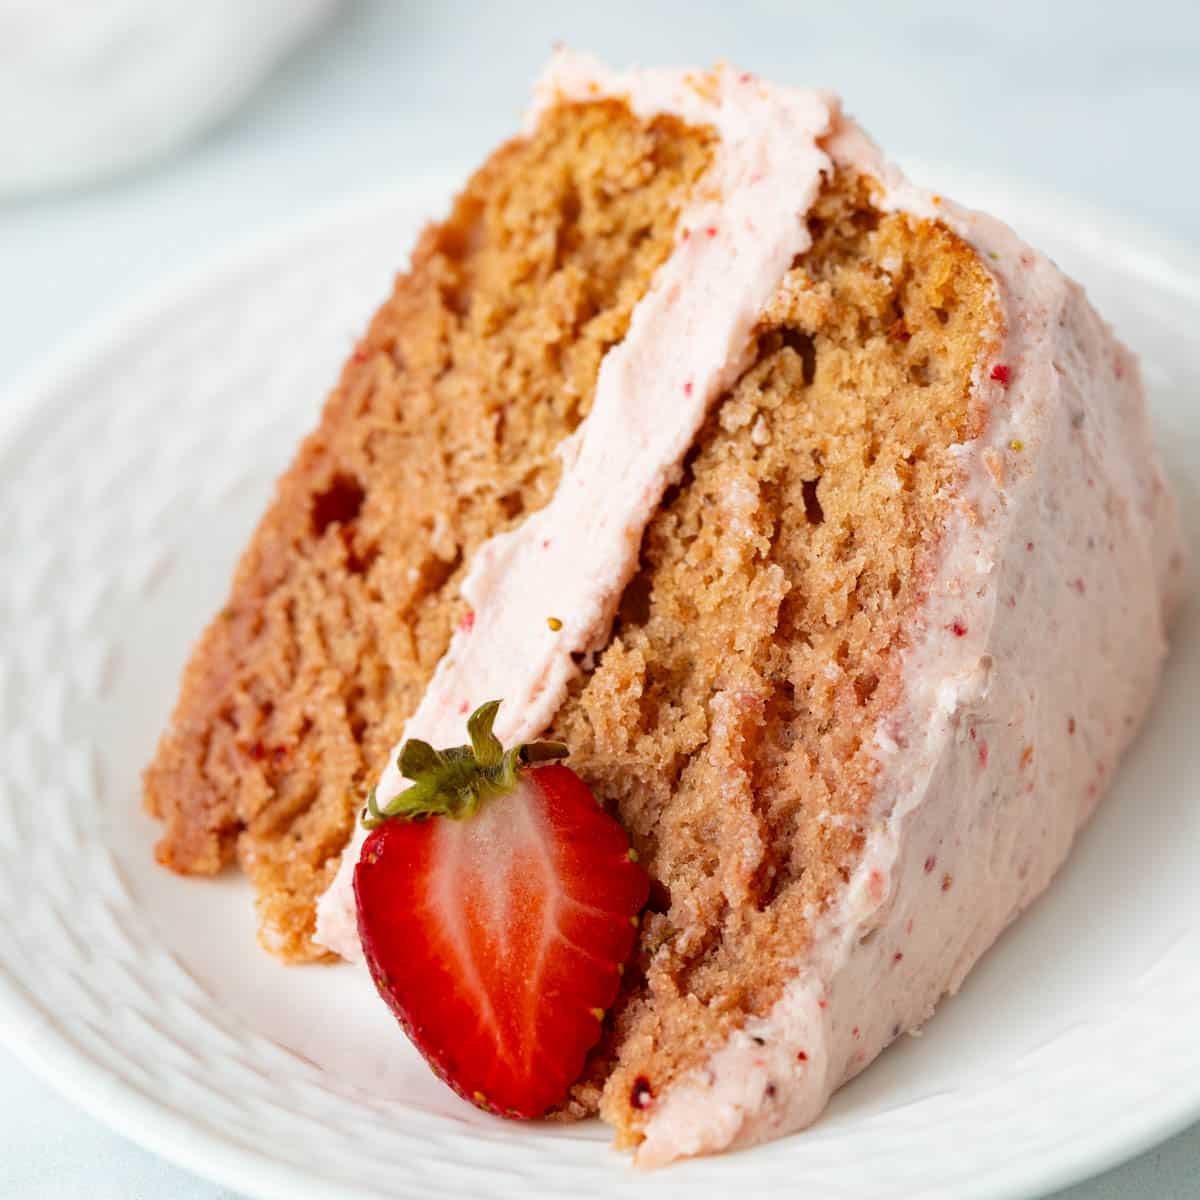 Moist and fluffy vegan strawberry cake infused with fresh strawberry flavor, topped with dairy-free frosting